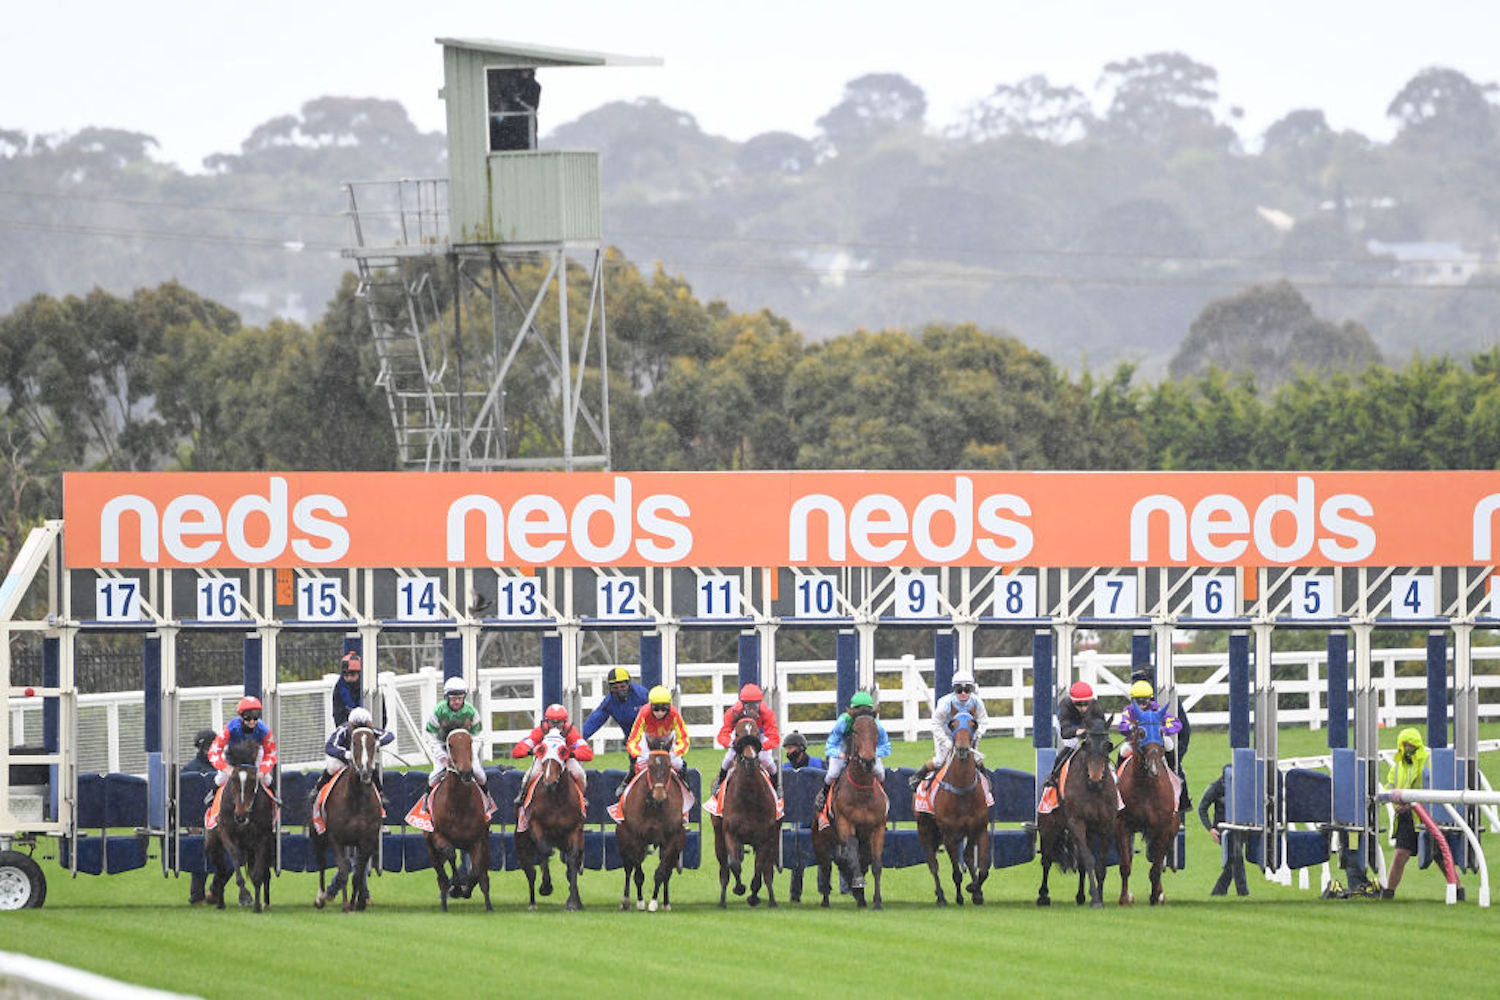 Australian Man Accidentally Wins $600,000 Thanks to a Typo on a Horse Racing Bet